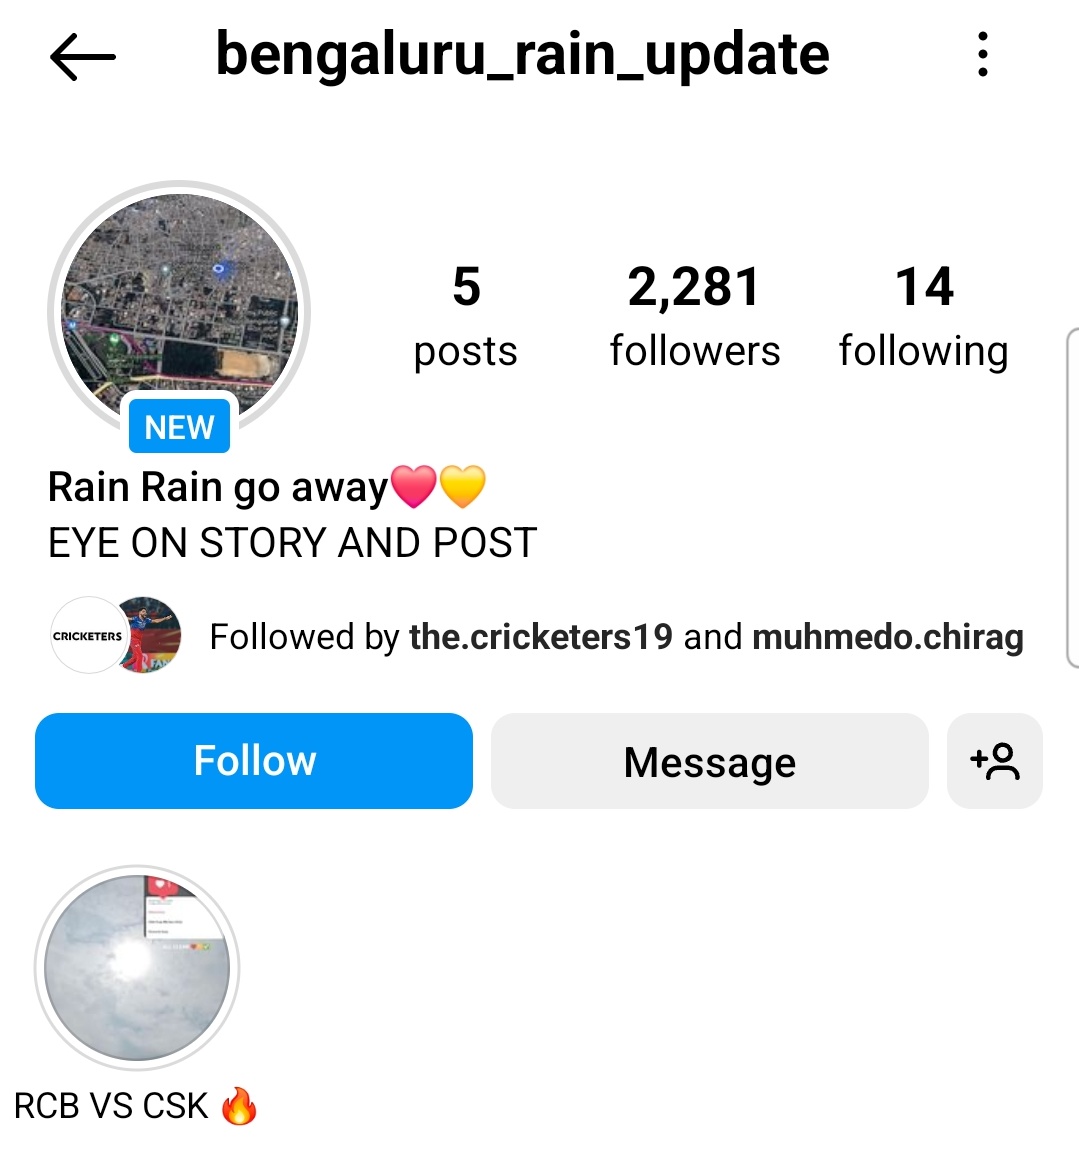 They literally made a page to update weather near Stadium 😂

Aapda ko Avsar me badalna 😇

#ipl #RCBvsCSK